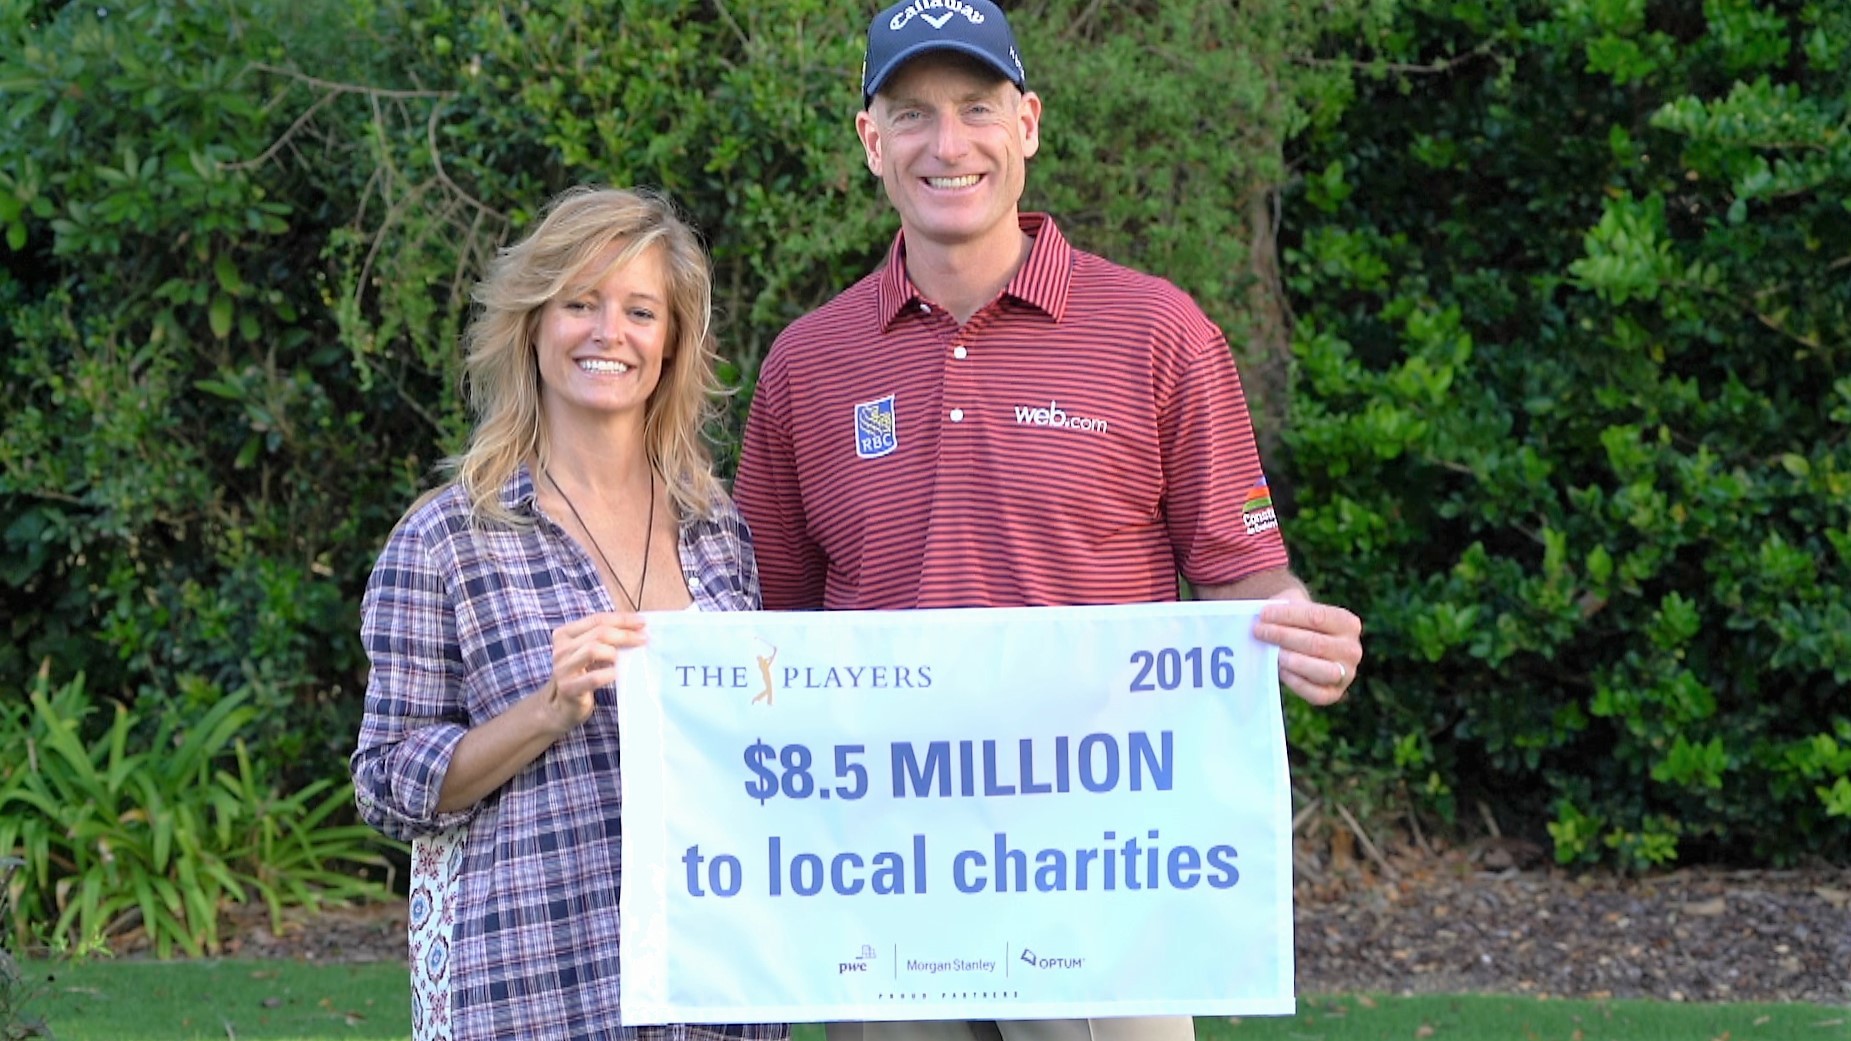 Tabitha and Jim Furyk display the total raised at the 2016 PLAYERS Championship.